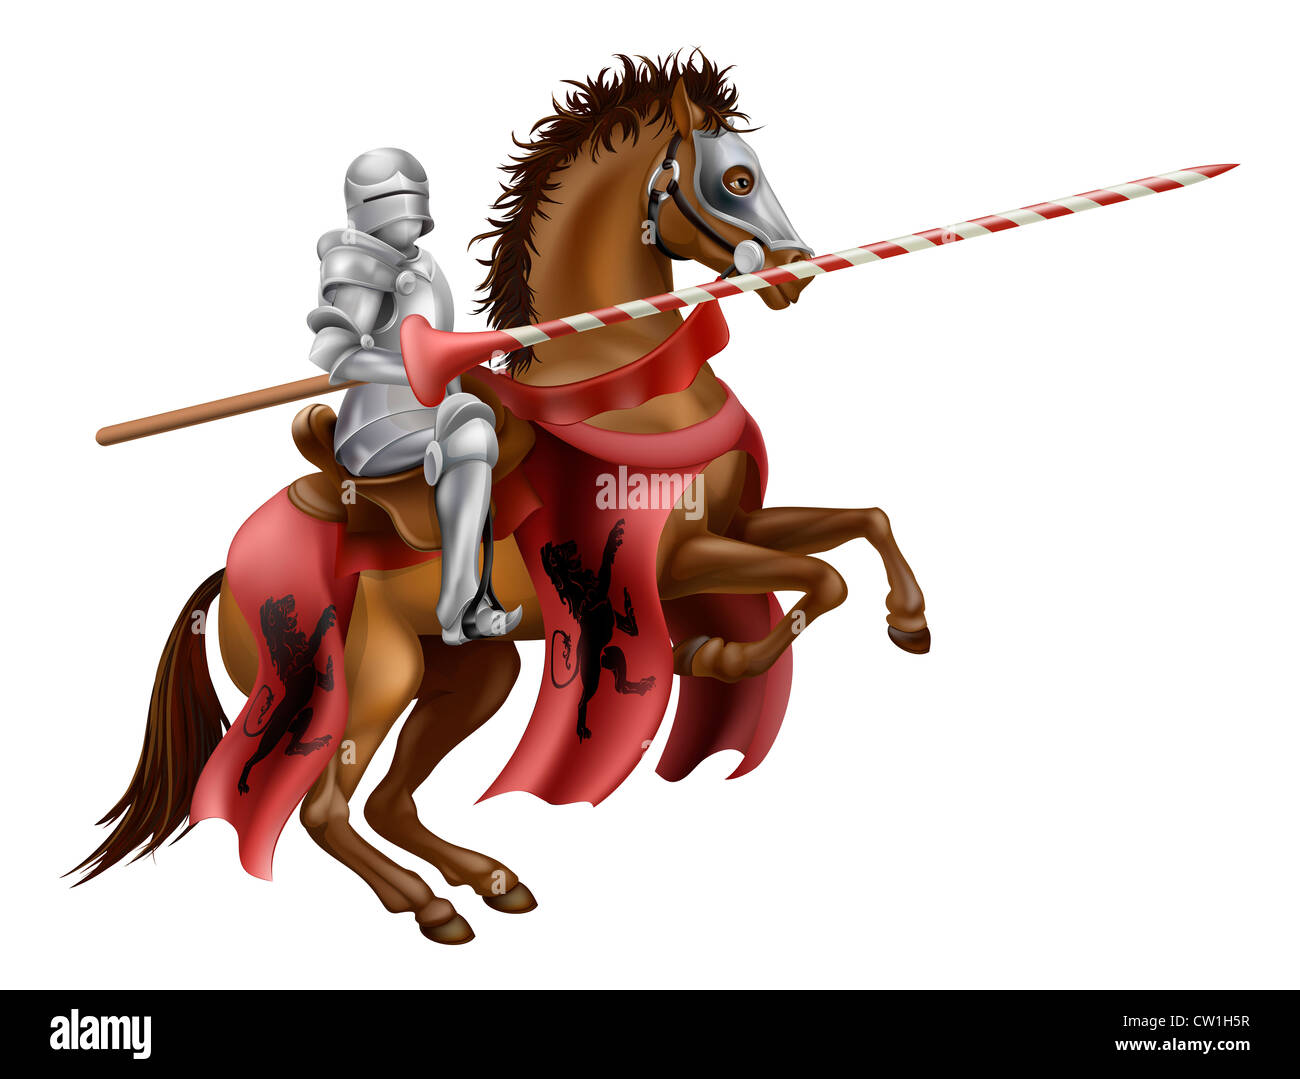 Illustration of a knight mounted on a horse holding a lance ready to joust Stock Photo